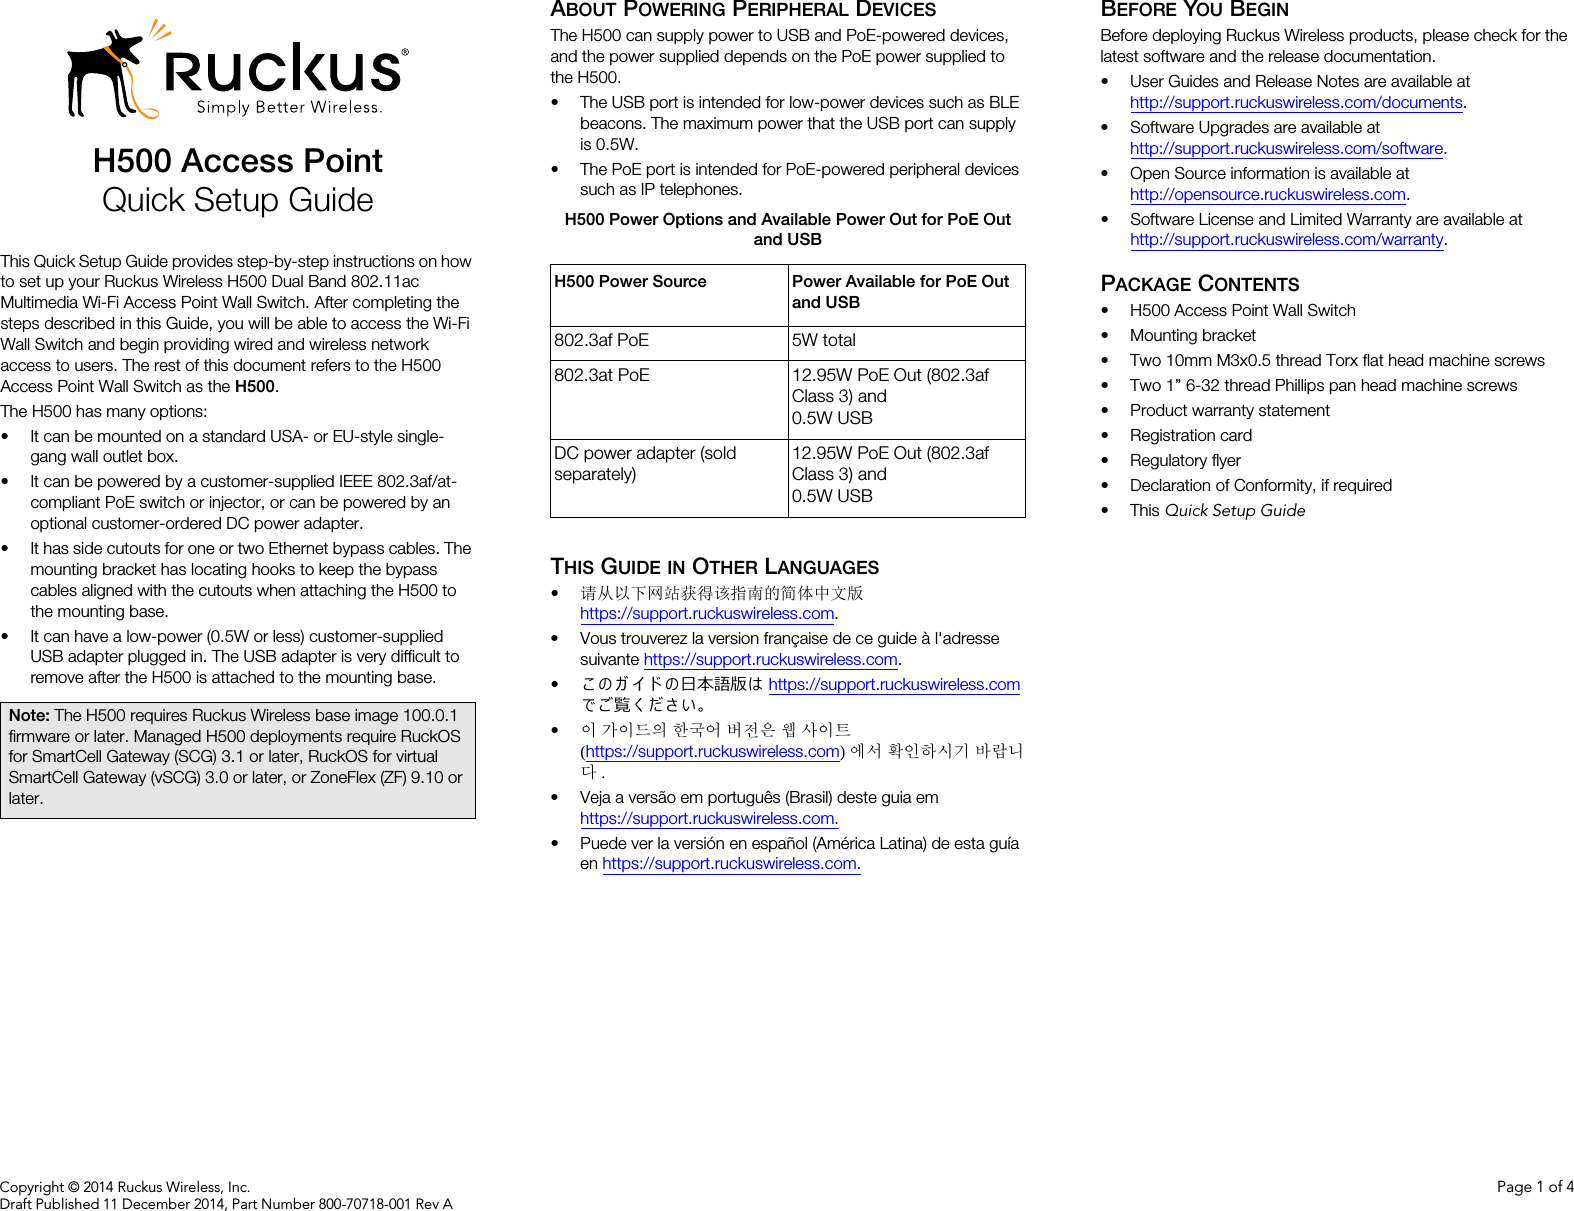 Copyright © 2014 Ruckus Wireless, Inc. Page 1 of 4Draft Published 11 December 2014, Part Number 800-70718-001 Rev AH500 Access PointQuick Setup GuideThis Quick Setup Guide provides step-by-step instructions on how to set up your Ruckus Wireless H500 Dual Band 802.11ac Multimedia Wi-Fi Access Point Wall Switch. After completing the steps described in this Guide, you will be able to access the Wi-Fi Wall Switch and begin providing wired and wireless network access to users. The rest of this document refers to the H500 Access Point Wall Switch as the H500.The H500 has many options: • It can be mounted on a standard USA- or EU-style single-gang wall outlet box.• It can be powered by a customer-supplied IEEE 802.3af/at-compliant PoE switch or injector, or can be powered by an optional customer-ordered DC power adapter.• It has side cutouts for one or two Ethernet bypass cables. The mounting bracket has locating hooks to keep the bypass cables aligned with the cutouts when attaching the H500 to the mounting base.• It can have a low-power (0.5W or less) customer-supplied USB adapter plugged in. The USB adapter is very difficult to remove after the H500 is attached to the mounting base.ABOUT POWERING PERIPHERAL DEVICESThe H500 can supply power to USB and PoE-powered devices, and the power supplied depends on the PoE power supplied to the H500.• The USB port is intended for low-power devices such as BLE beacons. The maximum power that the USB port can supply is 0.5W. • The PoE port is intended for PoE-powered peripheral devices such as IP telephones.THIS GUIDE IN OTHER LANGUAGES•请从以下网站获得该指南的简体中文版 https://support.ruckuswireless.com.• Vous trouverez la version française de ce guide à l&apos;adresse suivante https://support.ruckuswireless.com.•こ の ガ イ ド の日本語版は https://support.ruckuswireless.com でご覧く ださい。•이 가이드의 한국어 버전은 웹 사이트(https://support.ruckuswireless.com)에서 확인하시기 바랍니다.• Veja a versão em português (Brasil) deste guia em https://support.ruckuswireless.com.• Puede ver la versión en español (América Latina) de esta guía en https://support.ruckuswireless.com.BEFORE YOU BEGINBefore deploying Ruckus Wireless products, please check for the latest software and the release documentation.• User Guides and Release Notes are available at http://support.ruckuswireless.com/documents.• Software Upgrades are available athttp://support.ruckuswireless.com/software.• Open Source information is available athttp://opensource.ruckuswireless.com.• Software License and Limited Warranty are available at http://support.ruckuswireless.com/warranty.PACKAGE CONTENTS• H500 Access Point Wall Switch• Mounting bracket• Two 10mm M3x0.5 thread Torx flat head machine screws• Two 1” 6-32 thread Phillips pan head machine screws• Product warranty statement• Registration card• Regulatory flyer• Declaration of Conformity, if required•This Quick Setup GuideNote: The H500 requires Ruckus Wireless base image 100.0.1 firmware or later. Managed H500 deployments require RuckOS for SmartCell Gateway (SCG) 3.1 or later, RuckOS for virtual SmartCell Gateway (vSCG) 3.0 or later, or ZoneFlex (ZF) 9.10 or later.H500 Power Options and Available Power Out for PoE Out and USBH500 Power Source Power Available for PoE Out and USB802.3af PoE 5W total802.3at PoE 12.95W PoE Out (802.3af Class 3) and 0.5W USBDC power adapter (sold separately)12.95W PoE Out (802.3af Class 3) and 0.5W USB